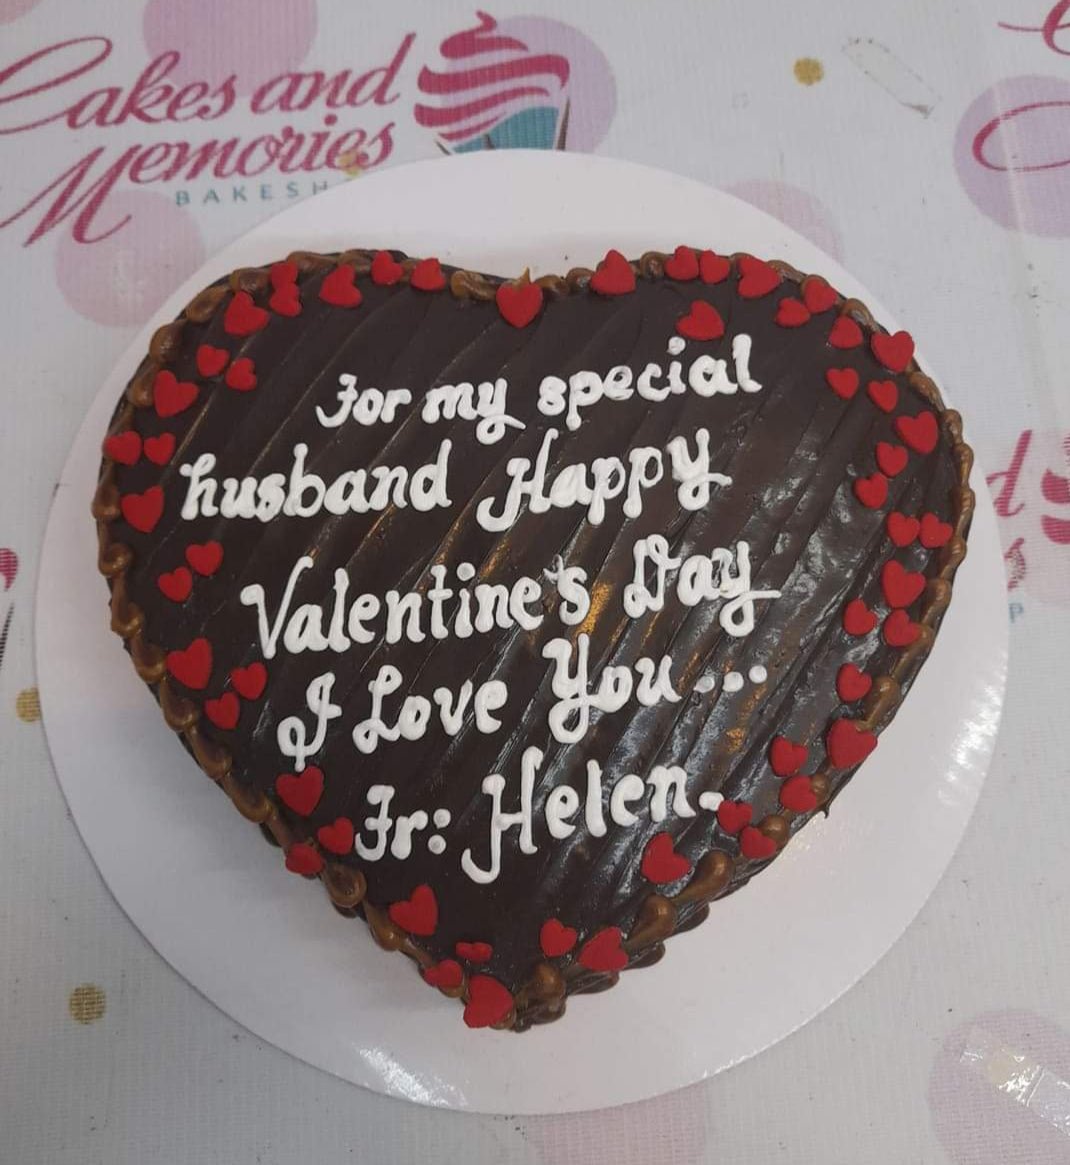 Valentines Cake - 1140 – Cakes and Memories Bakeshop